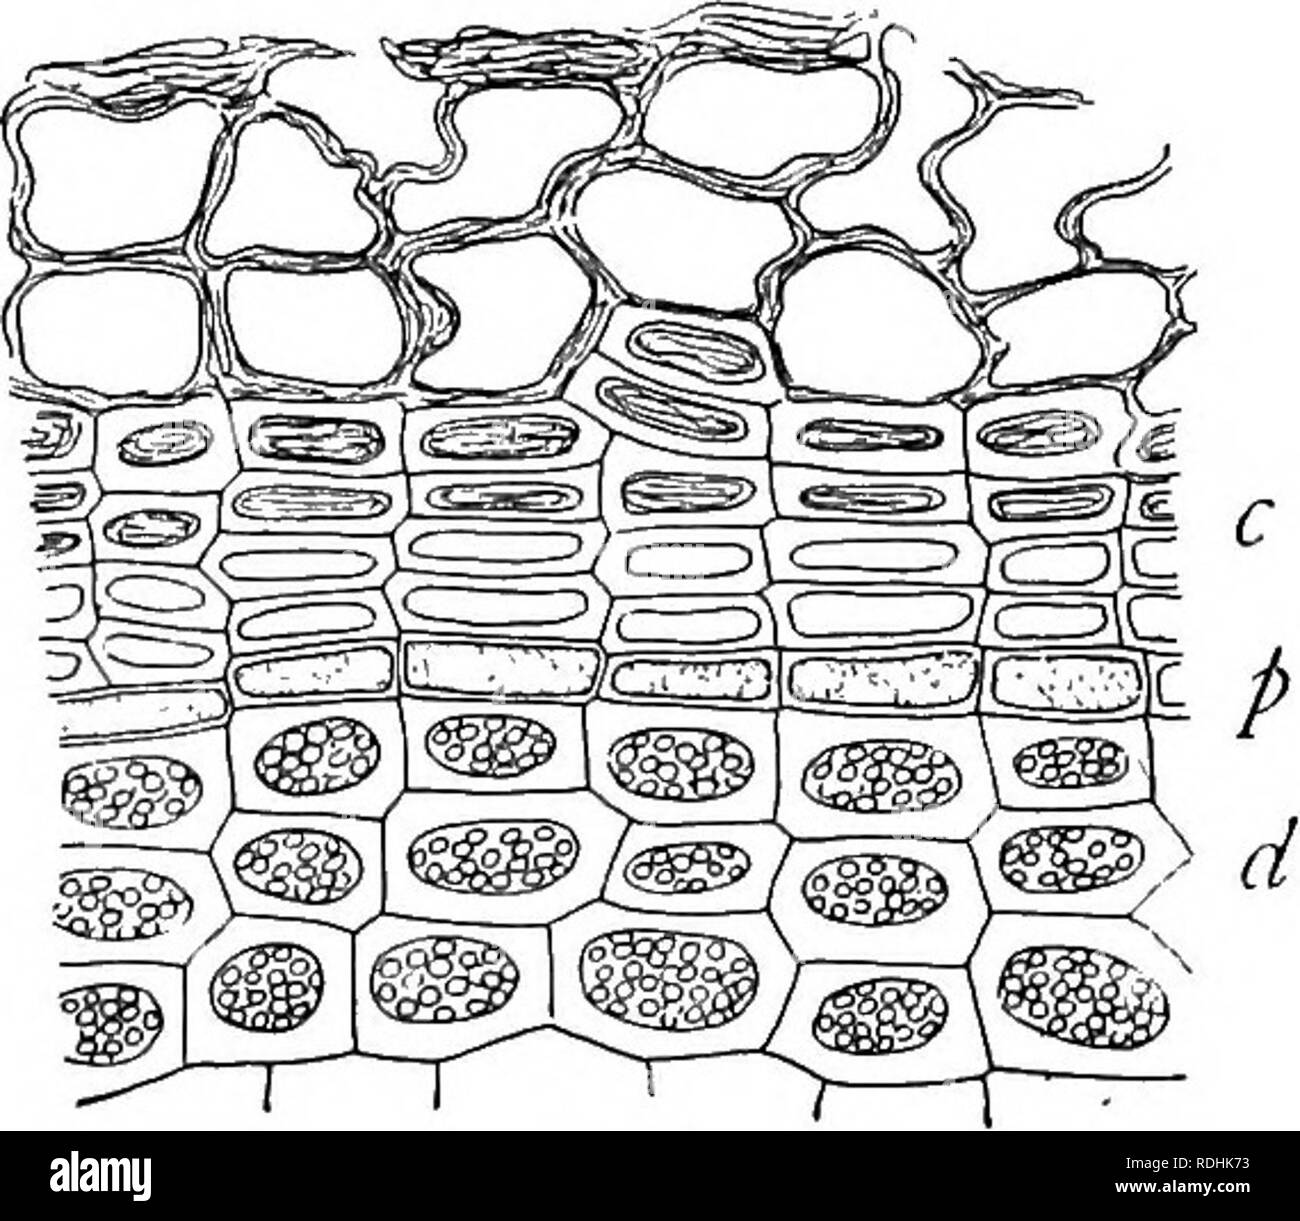 . A textbook of botany for colleges and universities ... Botany. 1032 1033 Figs. 1032, 1033. — 1032, a partial cross section of a stem of Jussiaea peruviana from a dry habitat, showing the development of cork tissue (c) underneath a stereome bundle of thick-walled cells (s); from Schenck; 1033, a cross section of the outer part of a bur oak twig (Quercus macrocarpa), showing the layers of the periderm; p, the phello- gen, from which cork (c) develops externally and phelloderm (d) internally; note that the phelloderm contains chloroplasts, that the cork layer is without air spaces, and that the Stock Photo